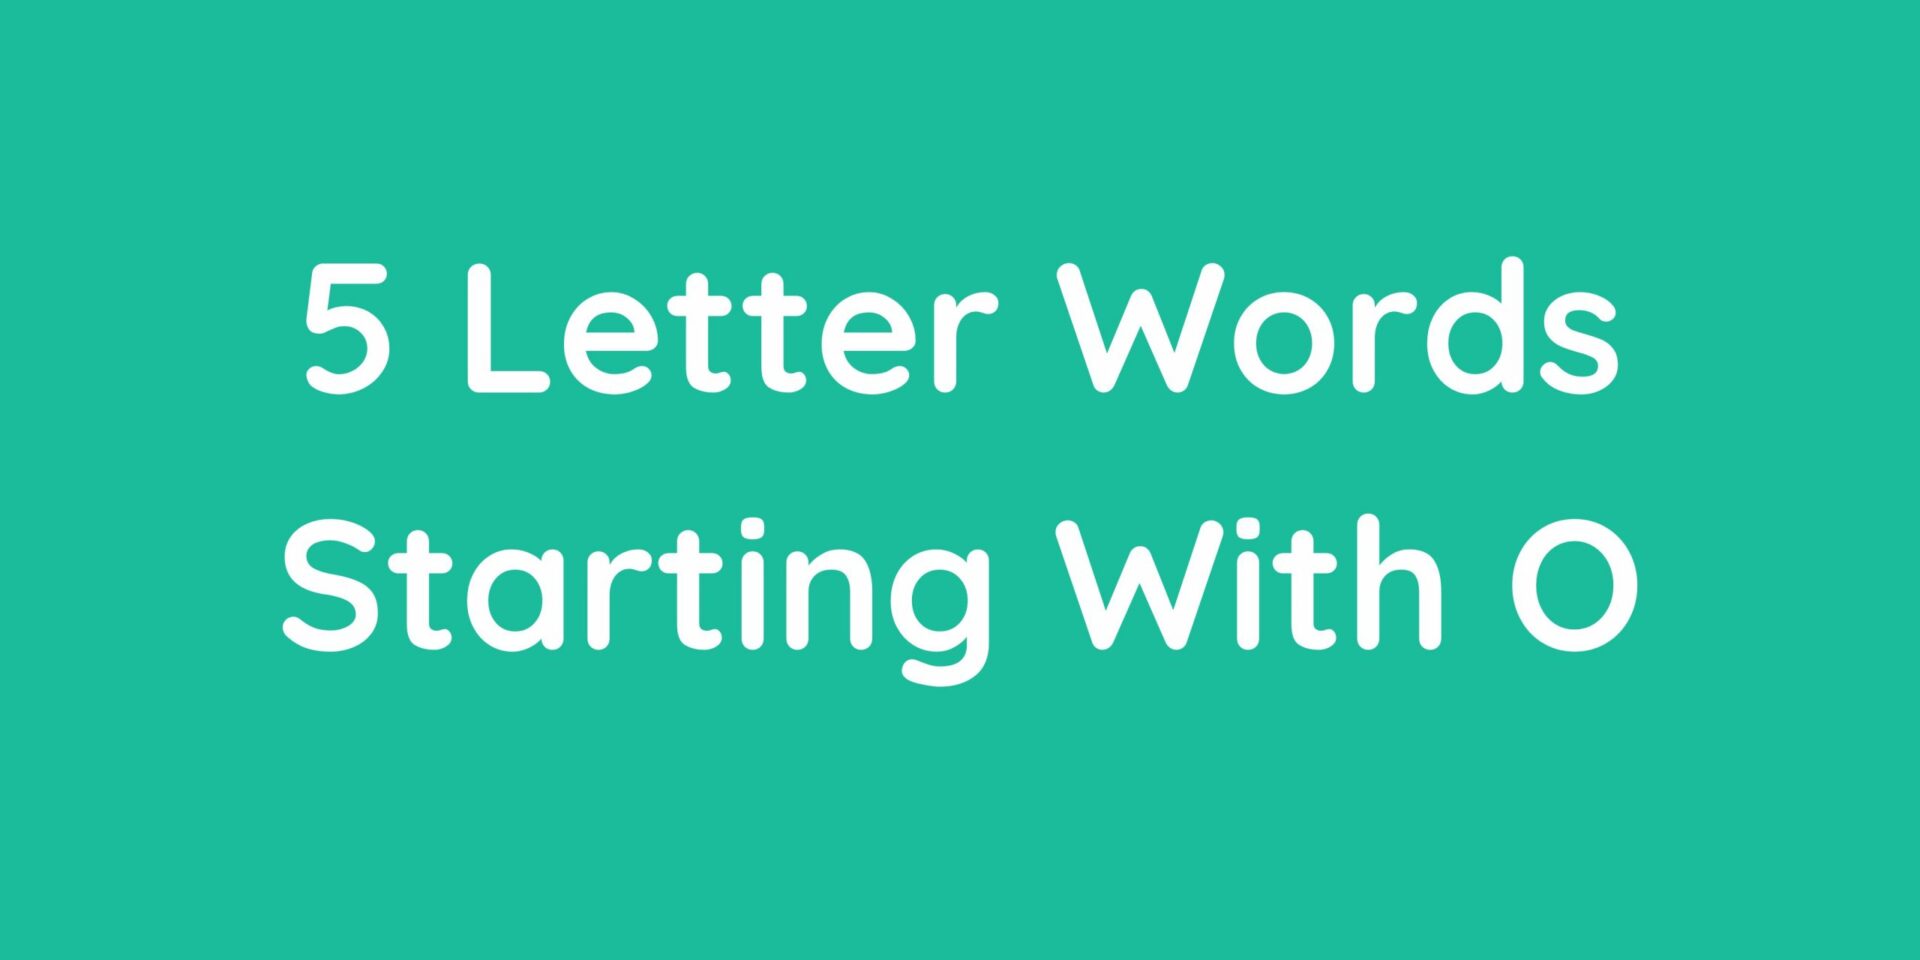 5 Letter Words That Start with 'O